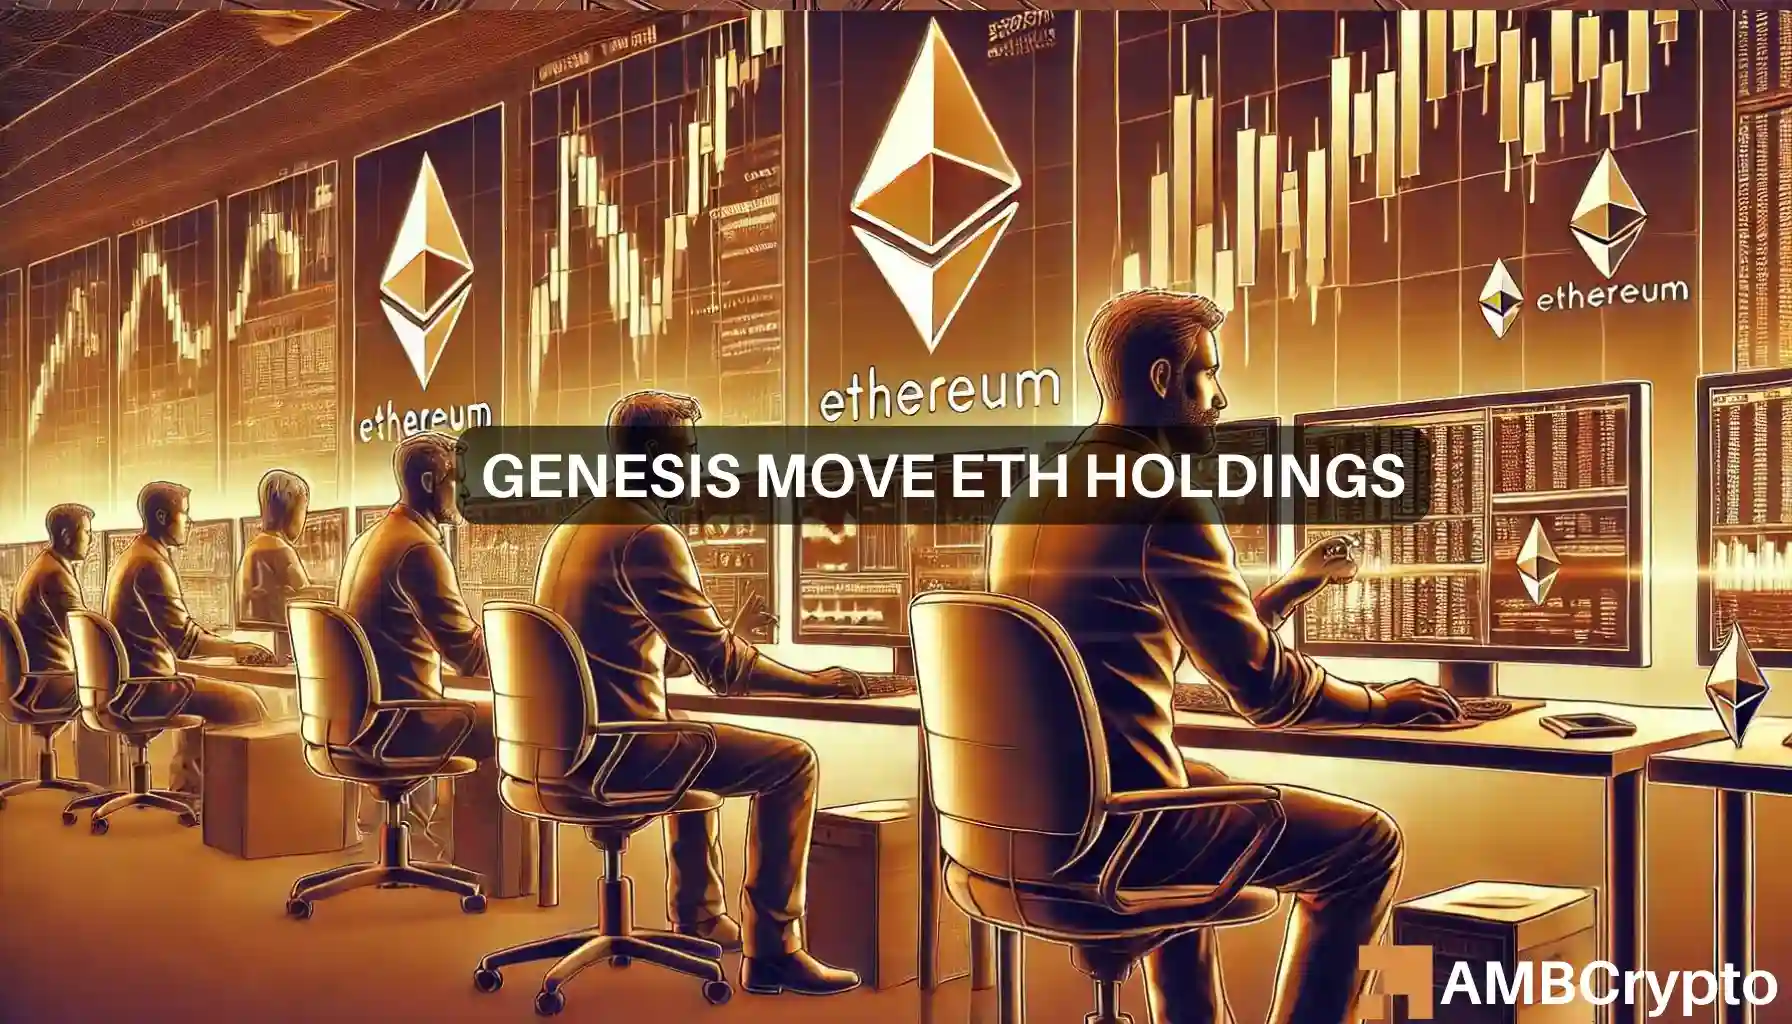 Ethereum – Genesis makes $127M move, but where does that leave traders?